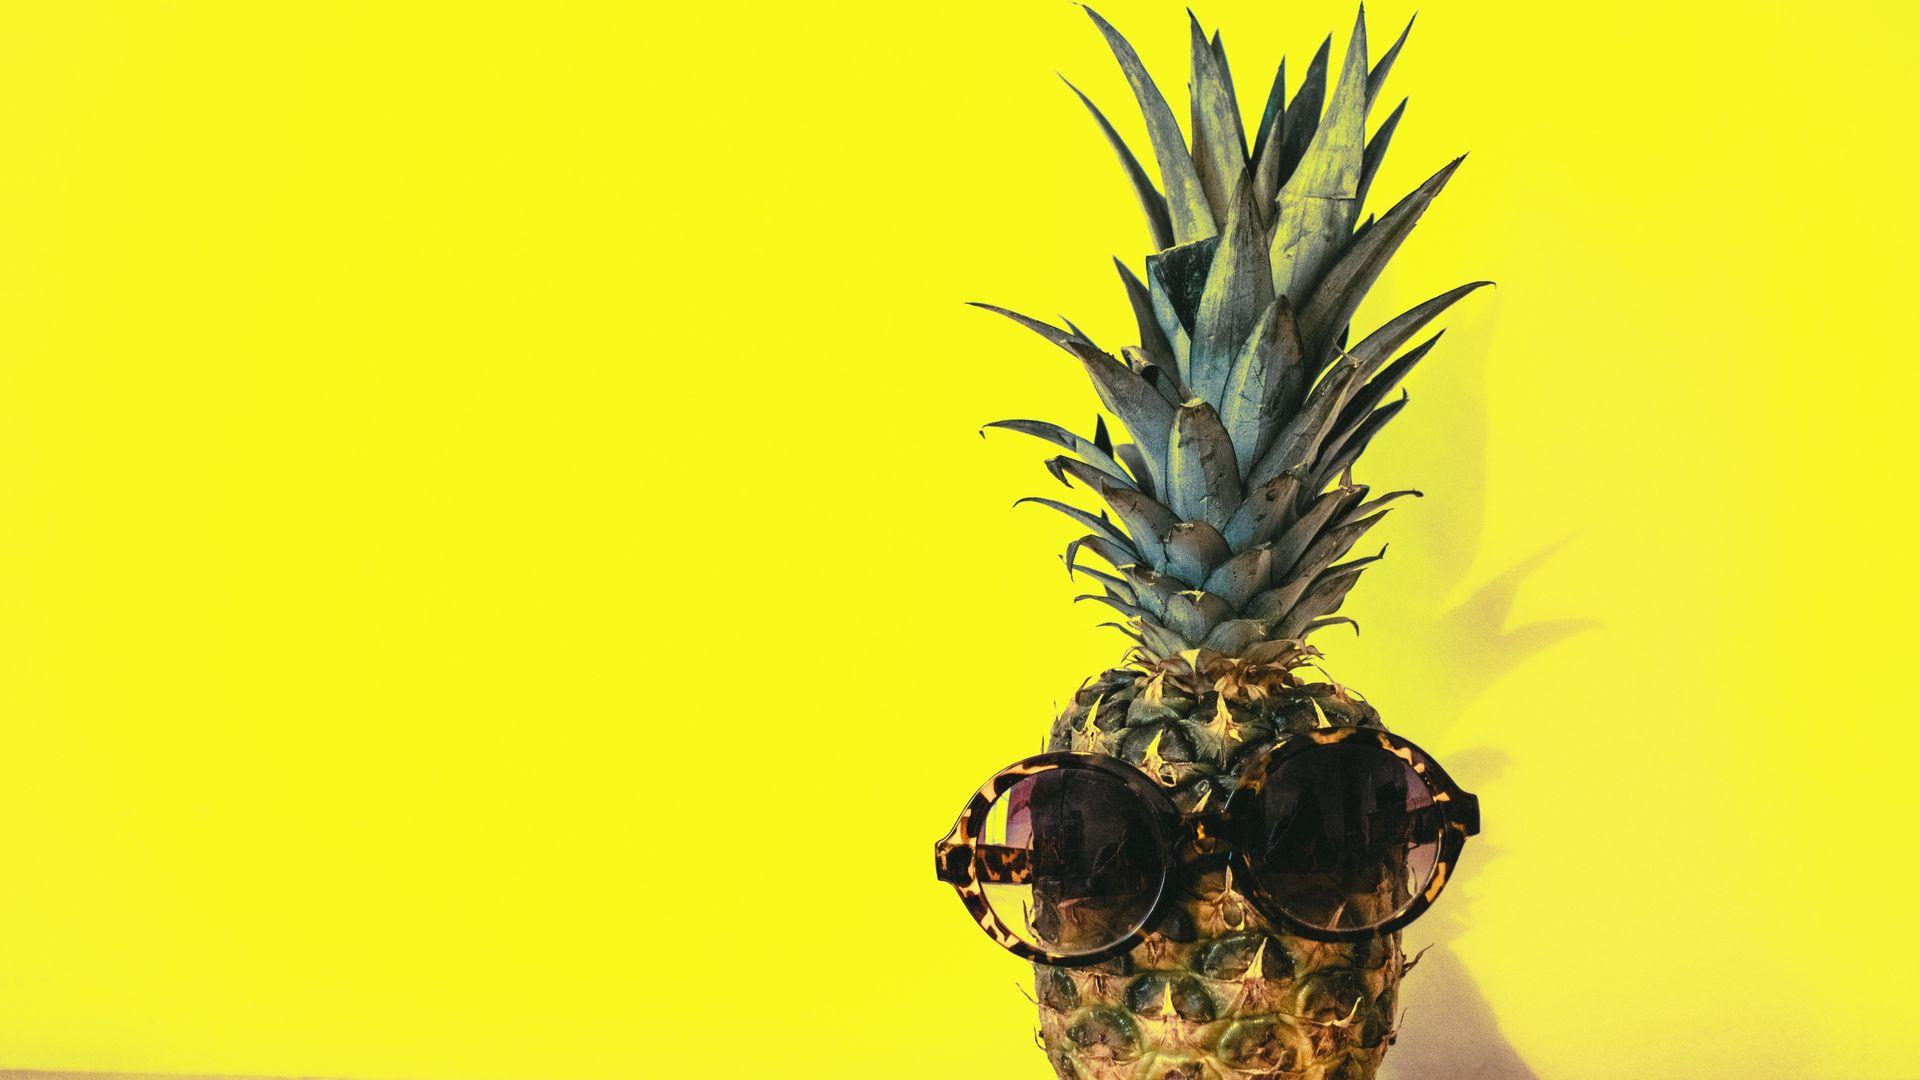 Pineapple with Sunglasses beside Yellow Surface Wallpaper